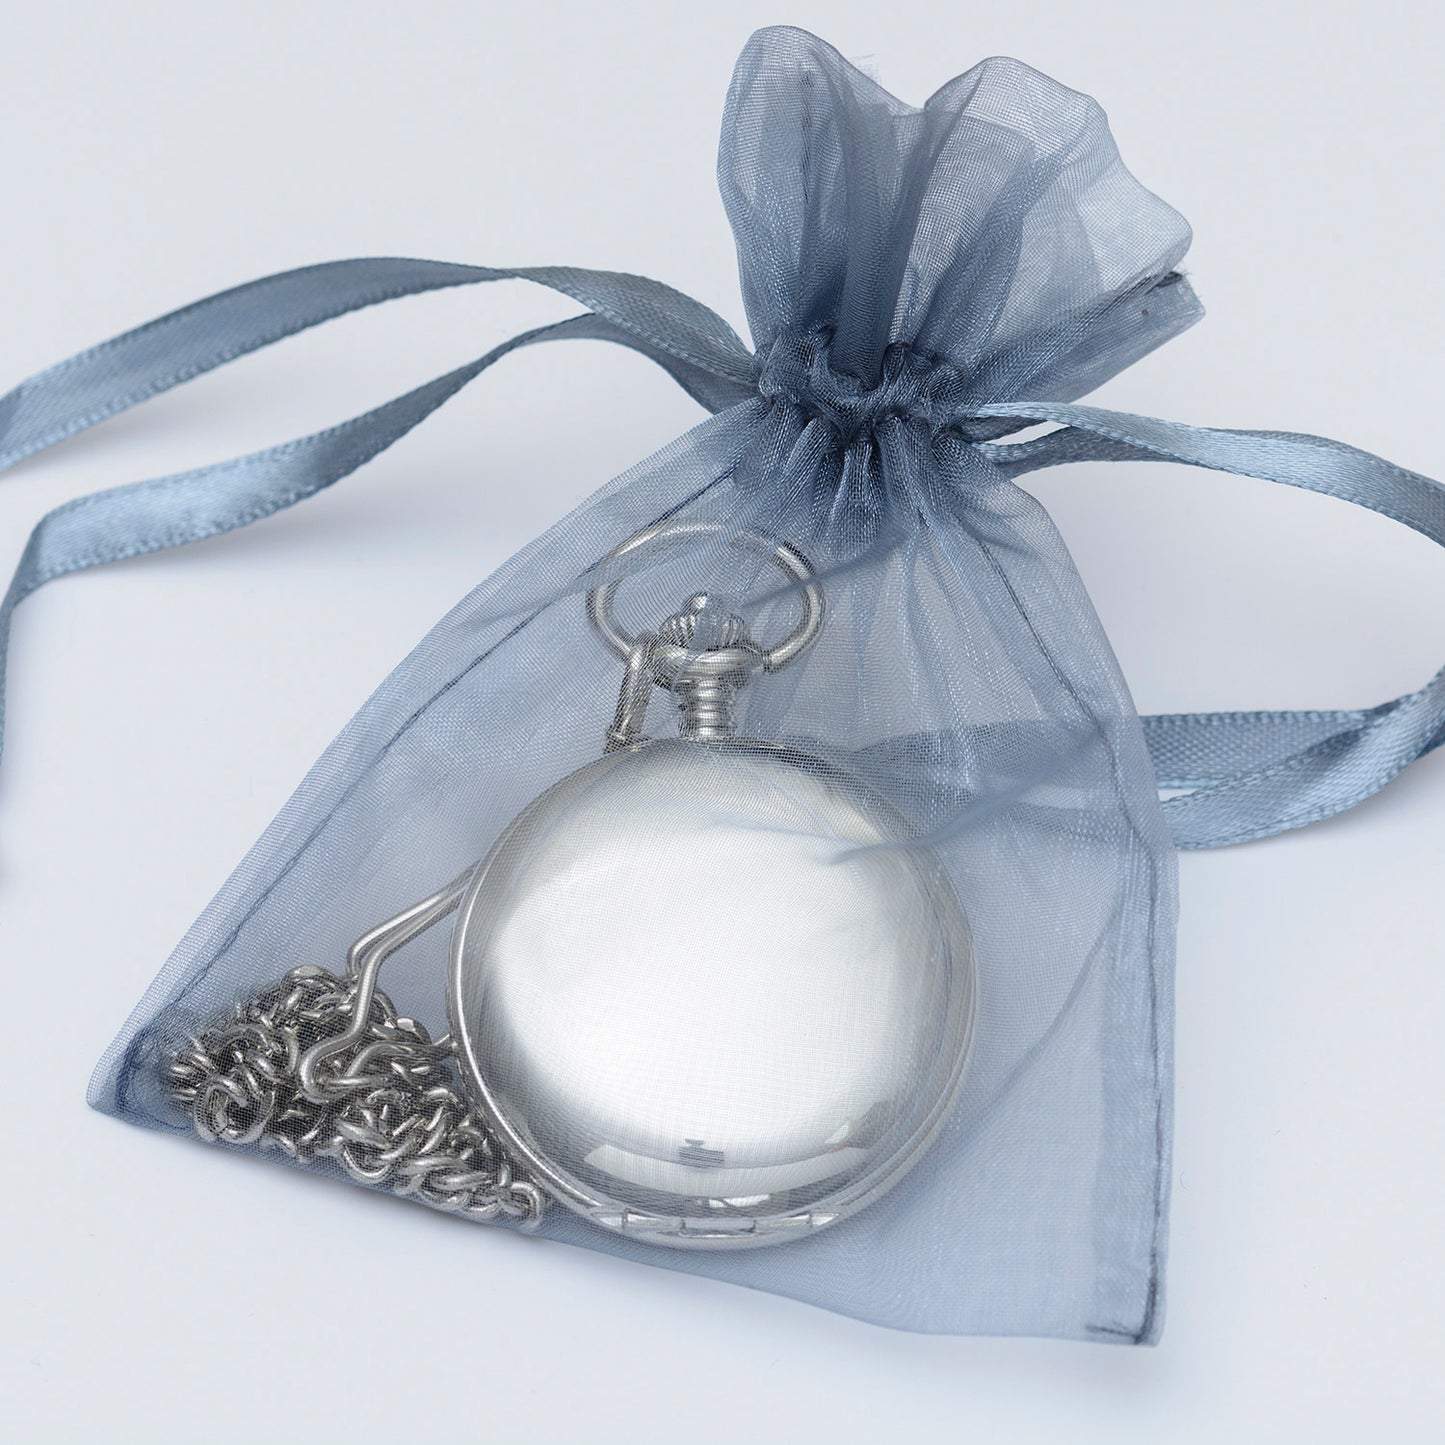 Engraved Pocket Watch For Father Of The Bride